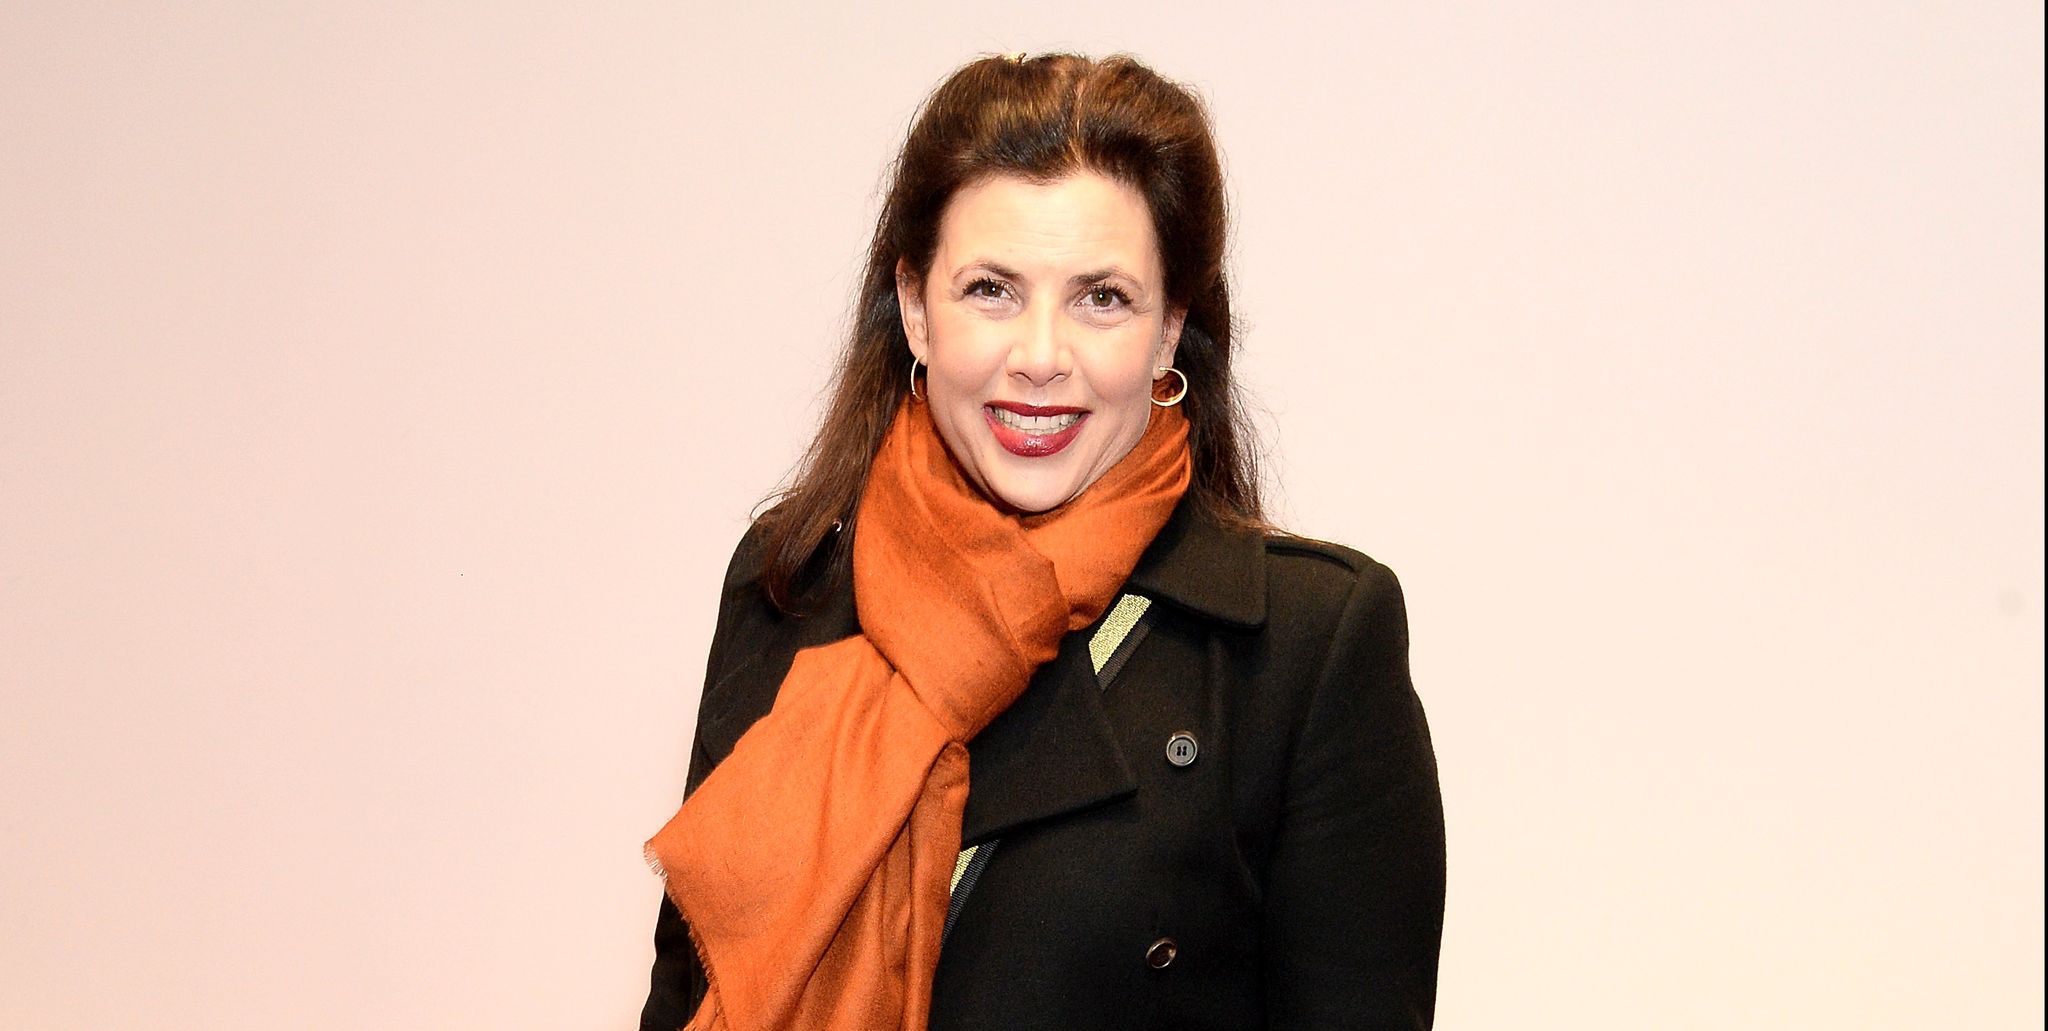 kirstie allsopp attends the 'fast and furious live' premiere, jan 2018